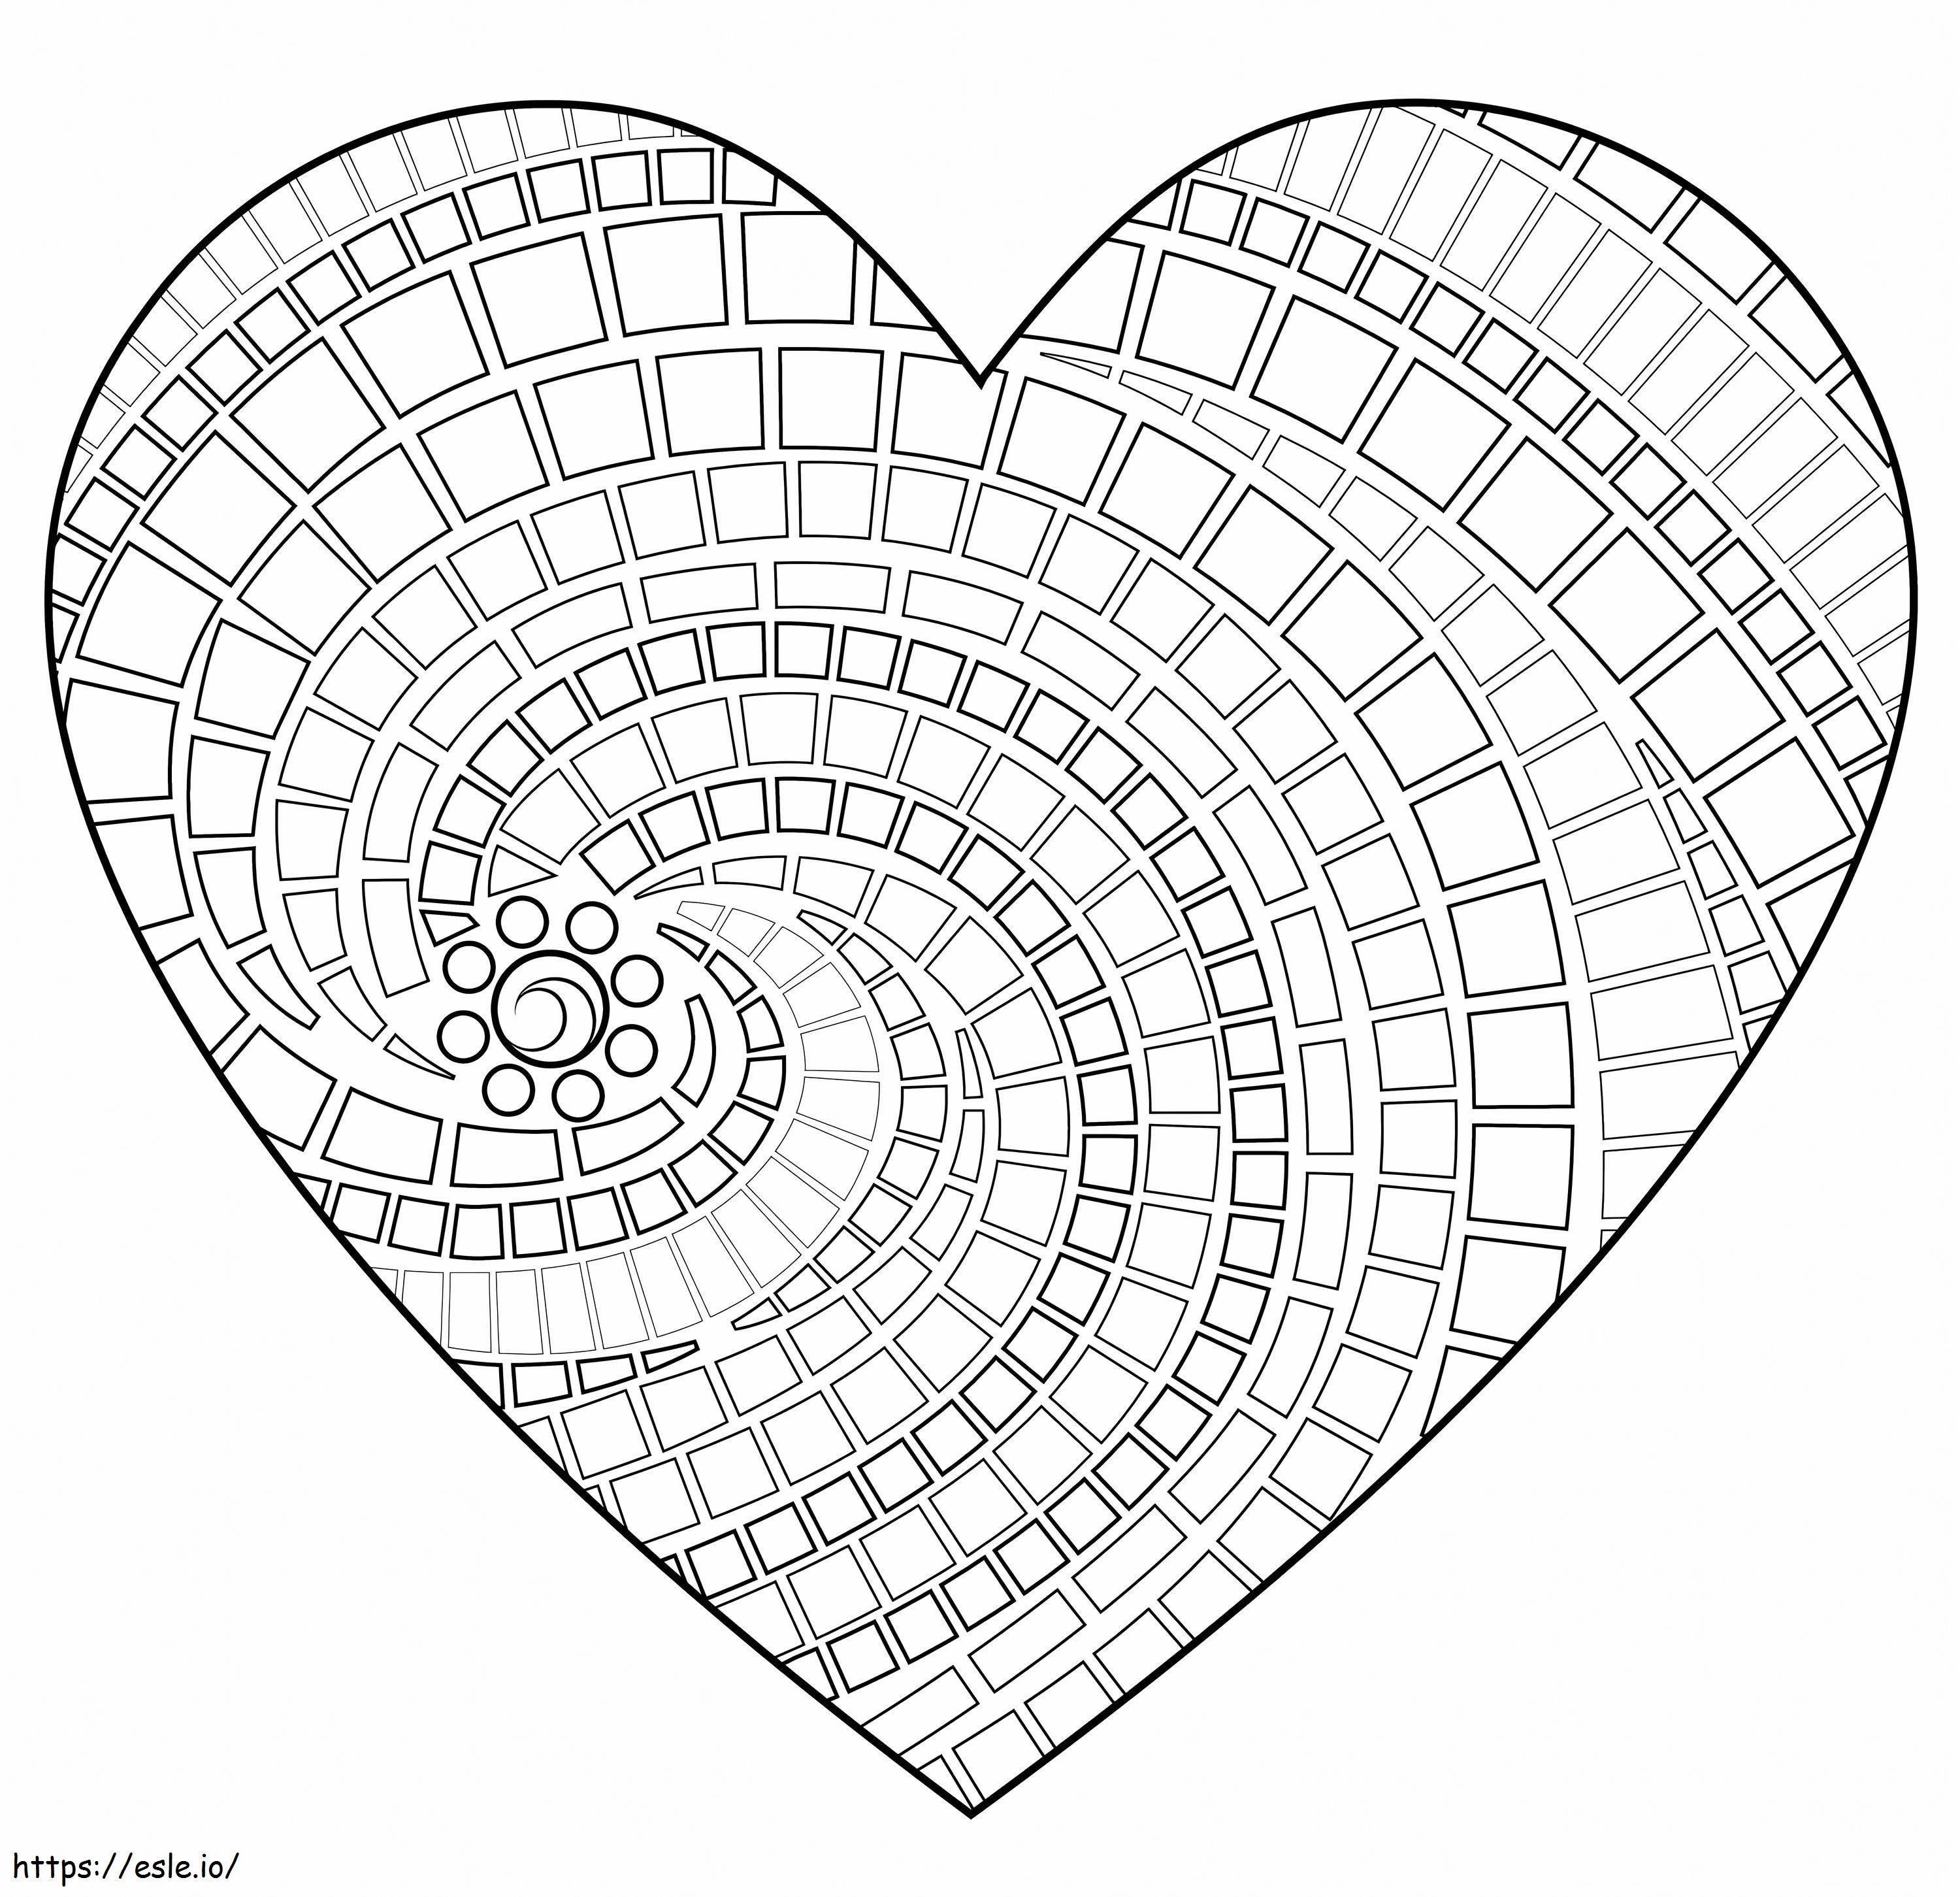 1576482307 Heart Mosaic coloring page